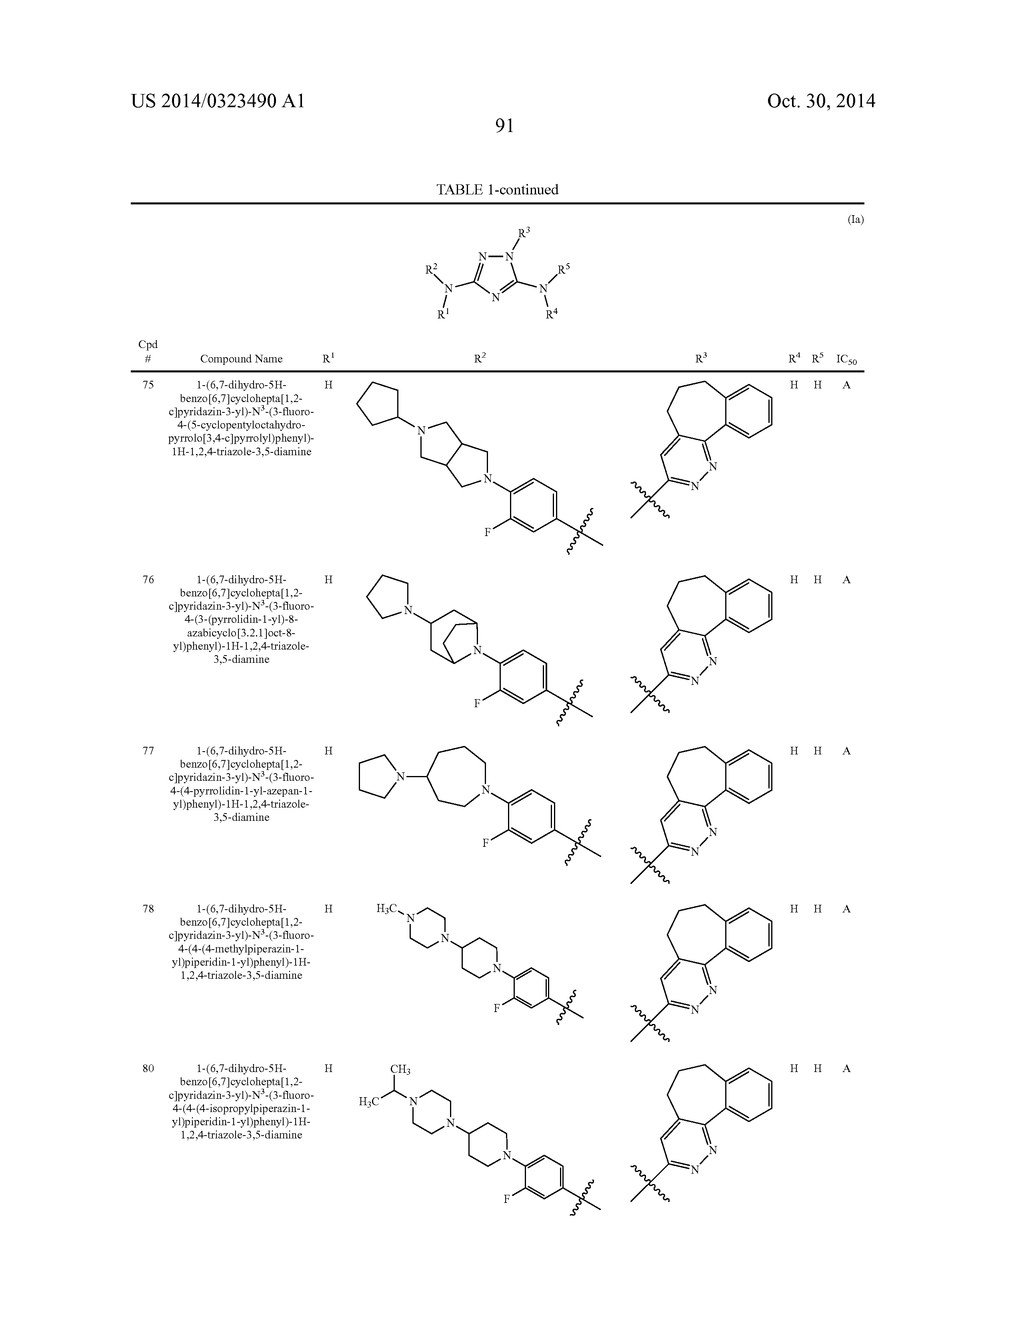 POLYCYCLIC HETEROARYL SUBSTITUTED TRIAZOLES USEFUL AS AXL INHIBITORS - diagram, schematic, and image 92